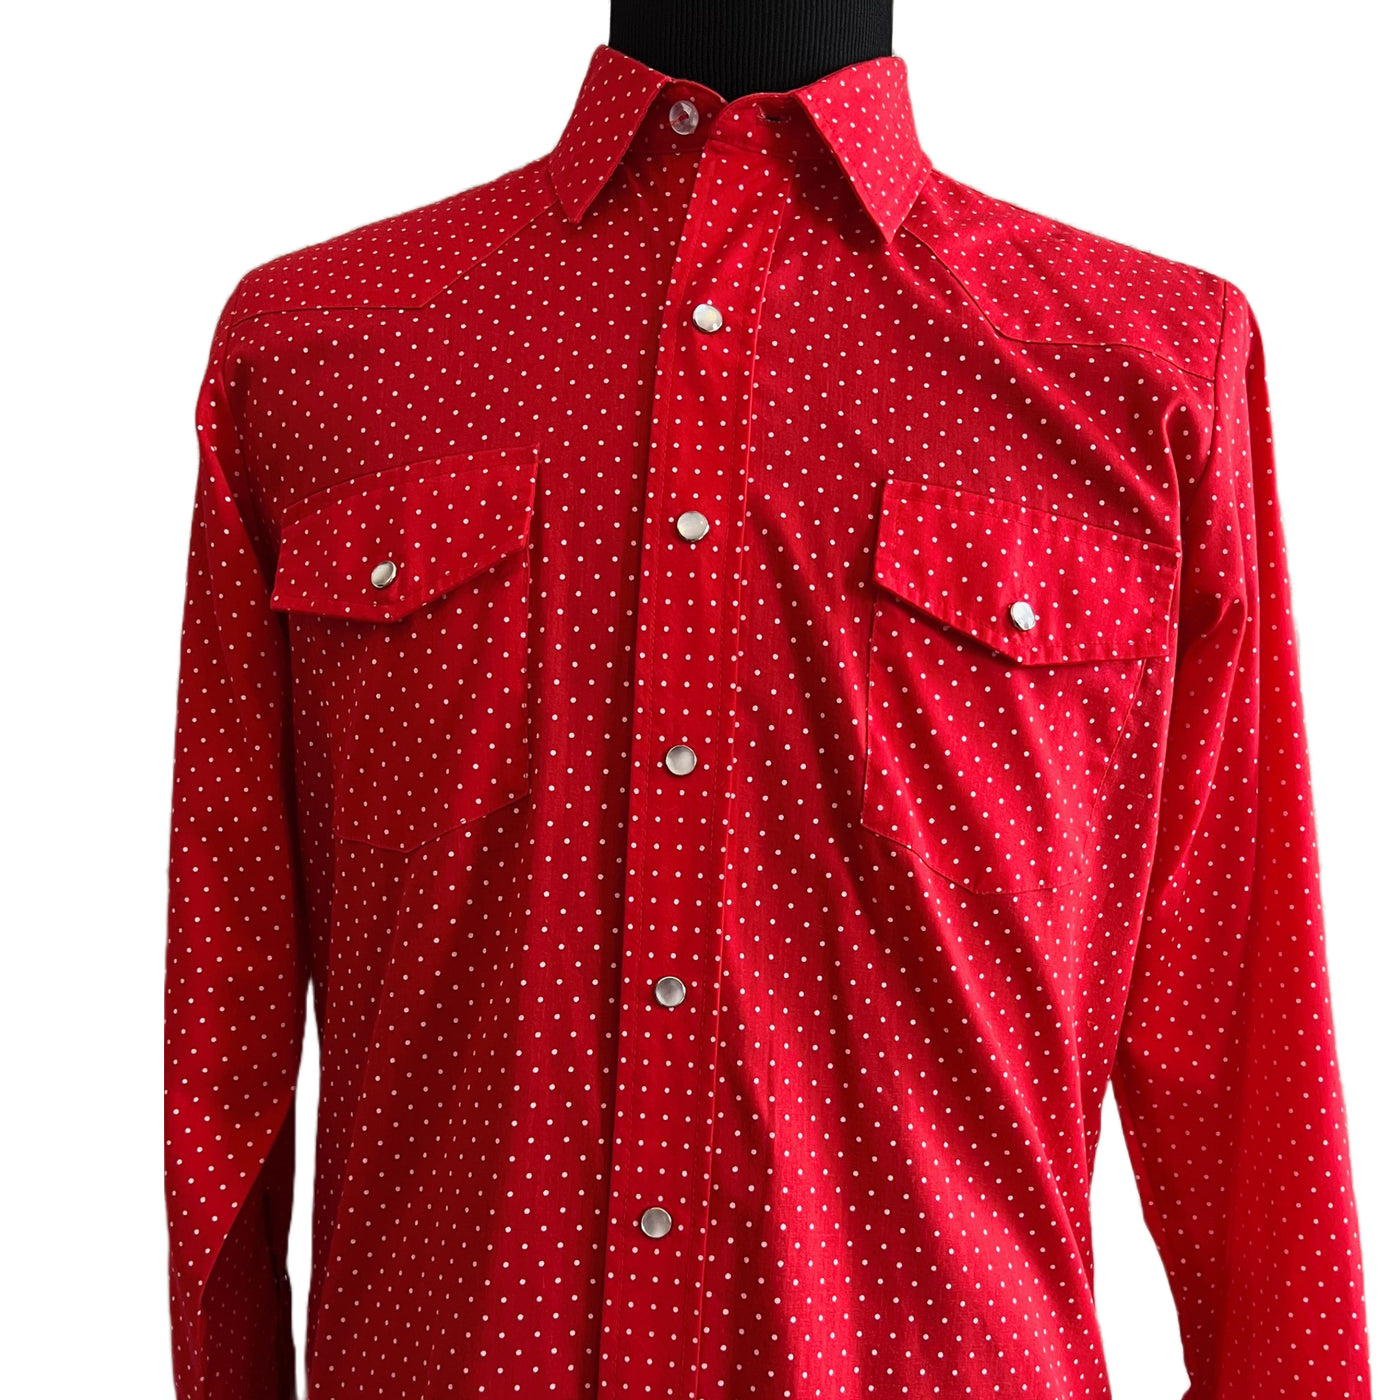 Vintage 70's Red Malco Modes Button Up Shirt